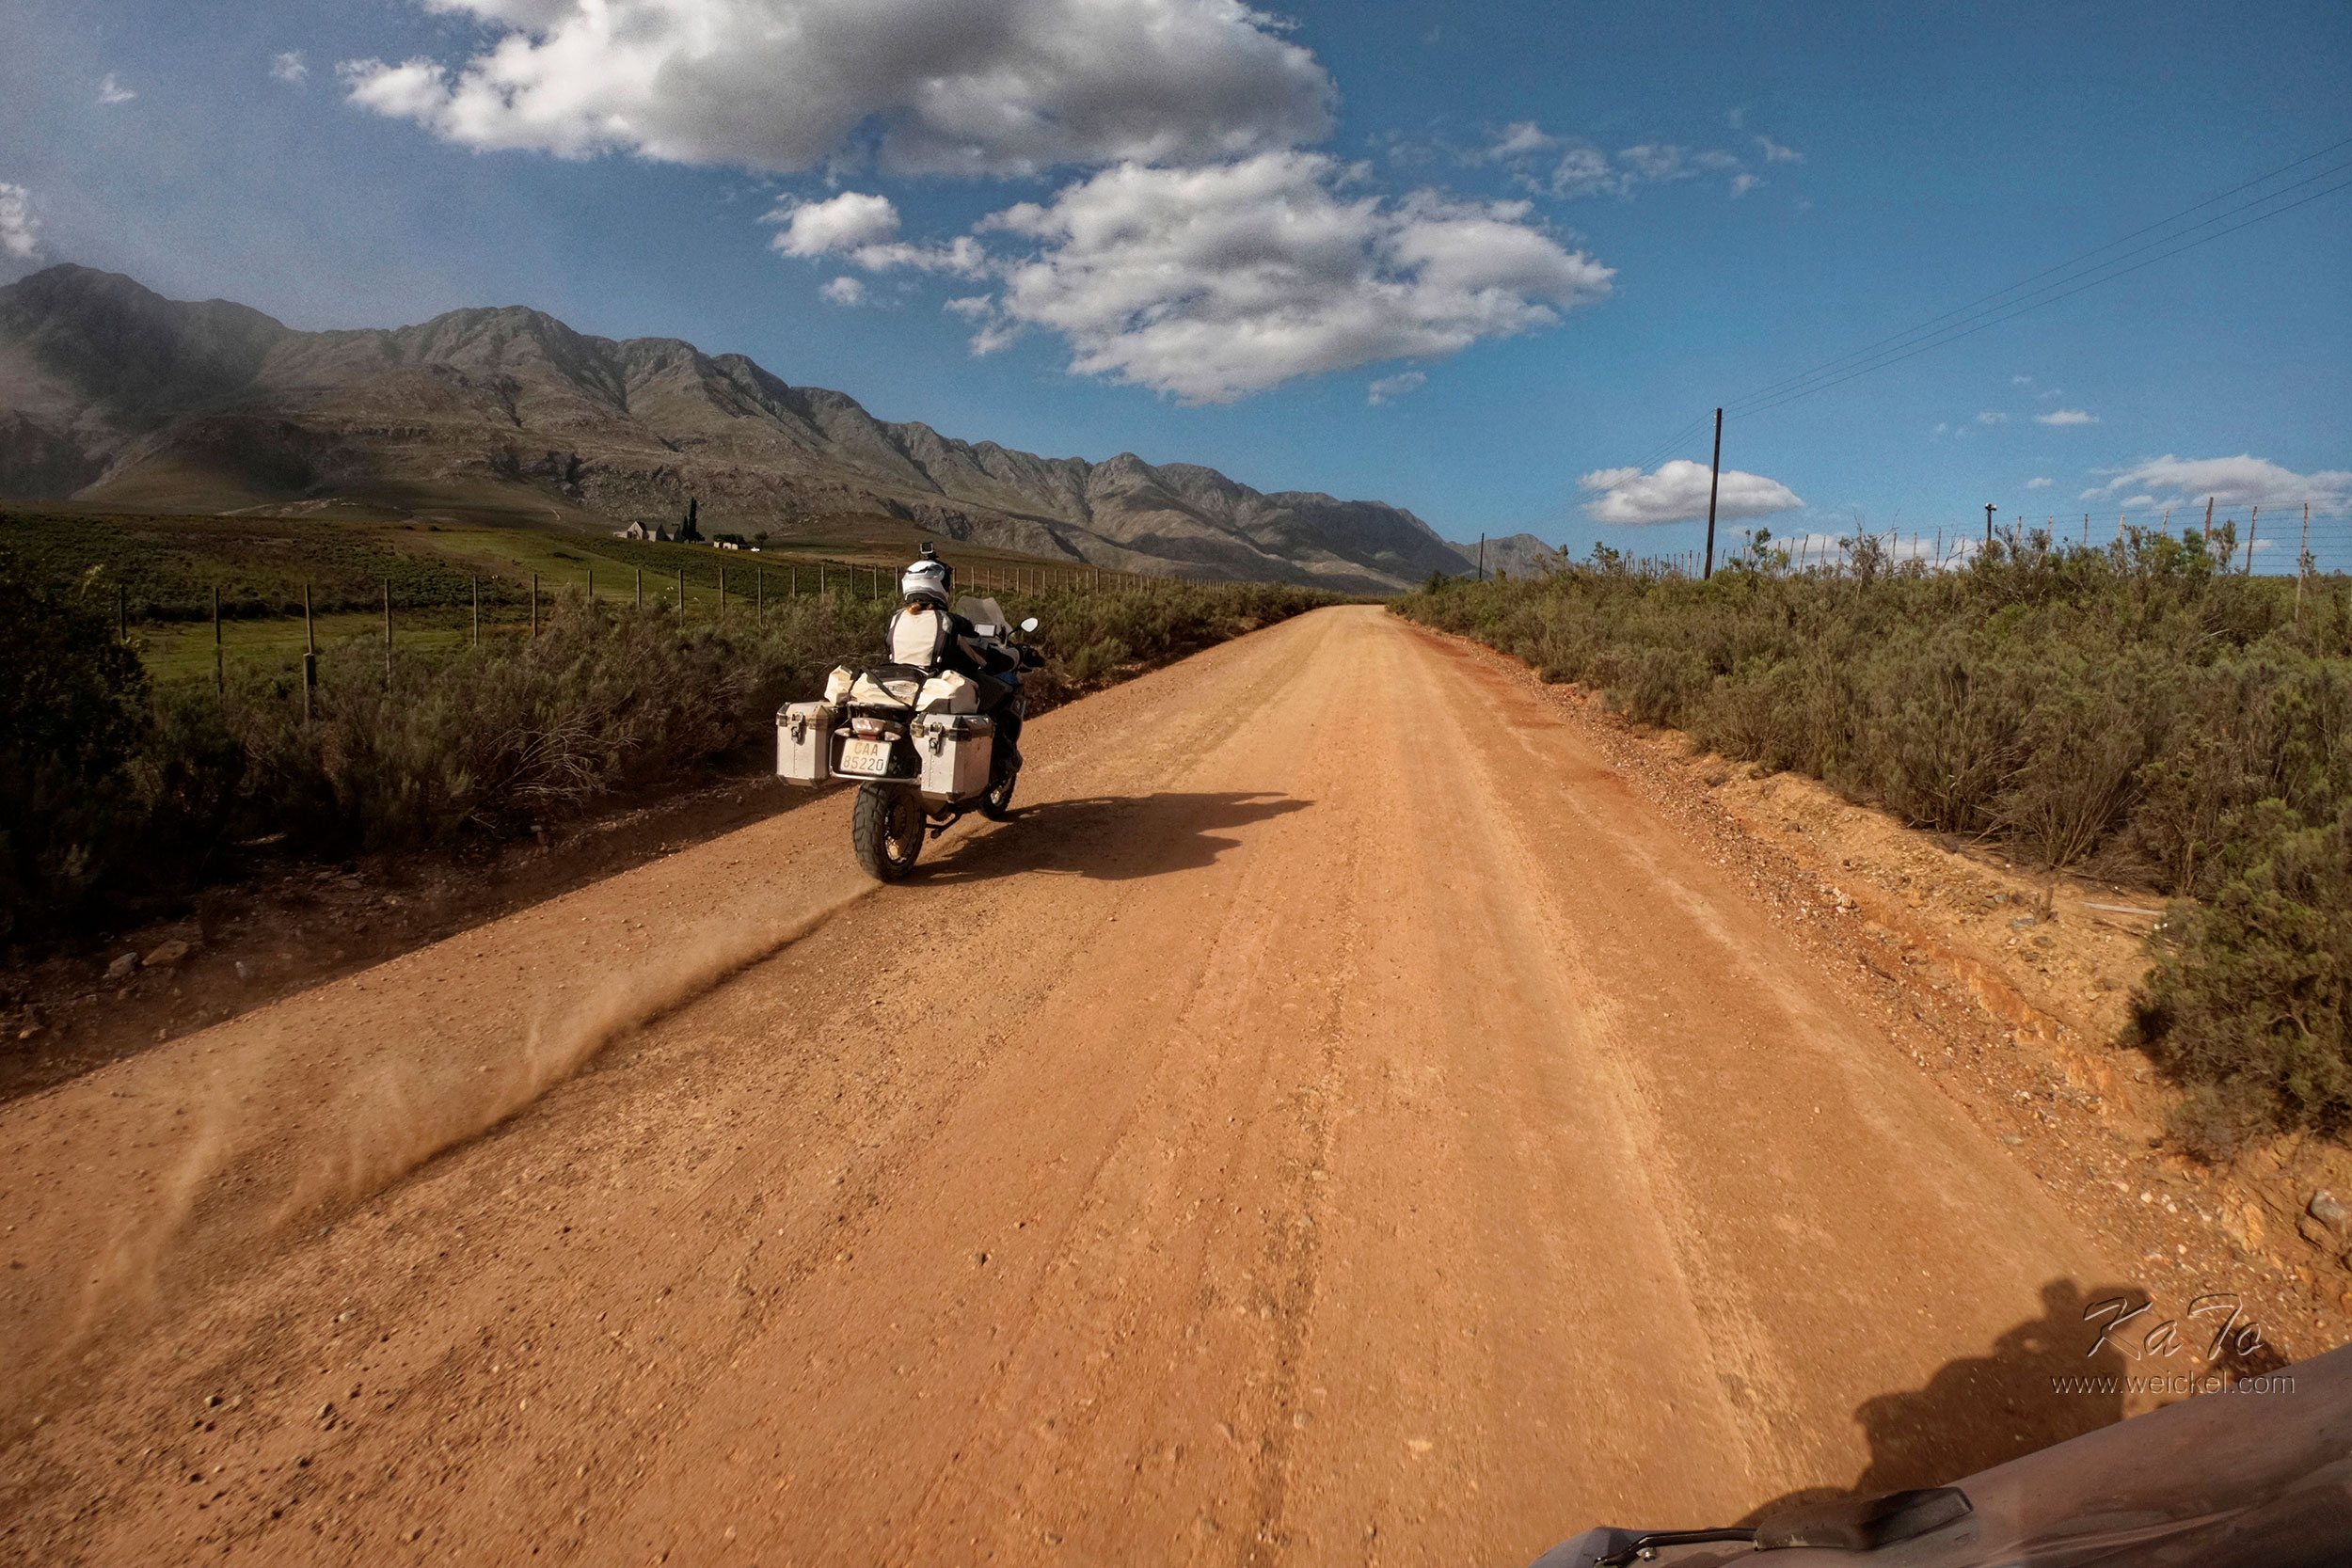 On the way to Swartberg Pass